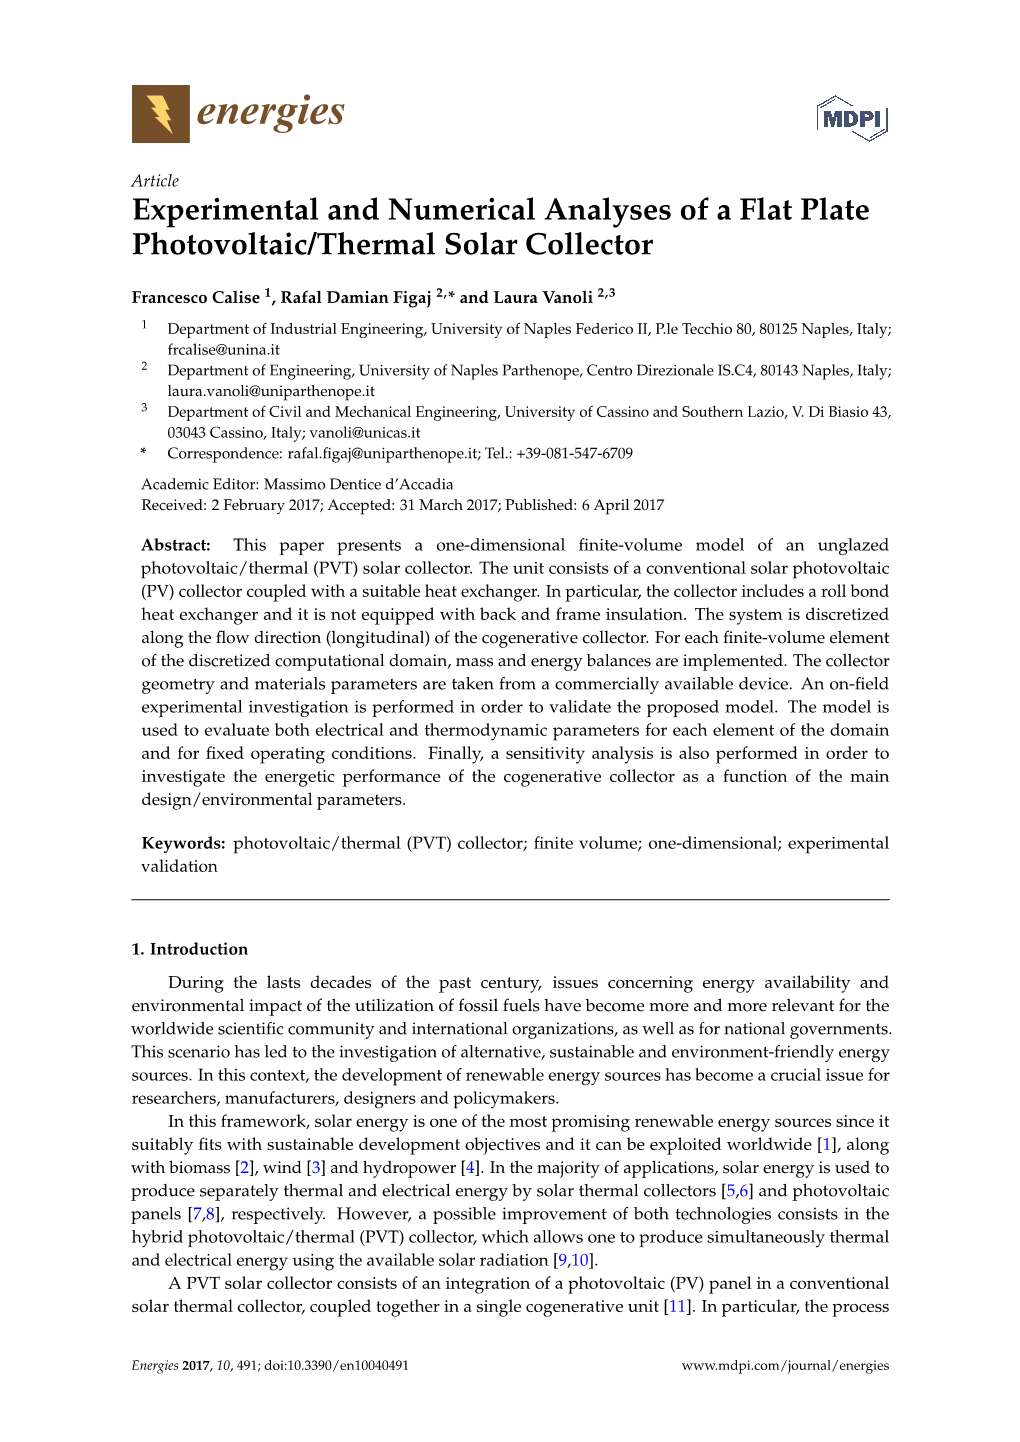 Experimental and Numerical Analyses of a Flat Plate Photovoltaic/Thermal Solar Collector